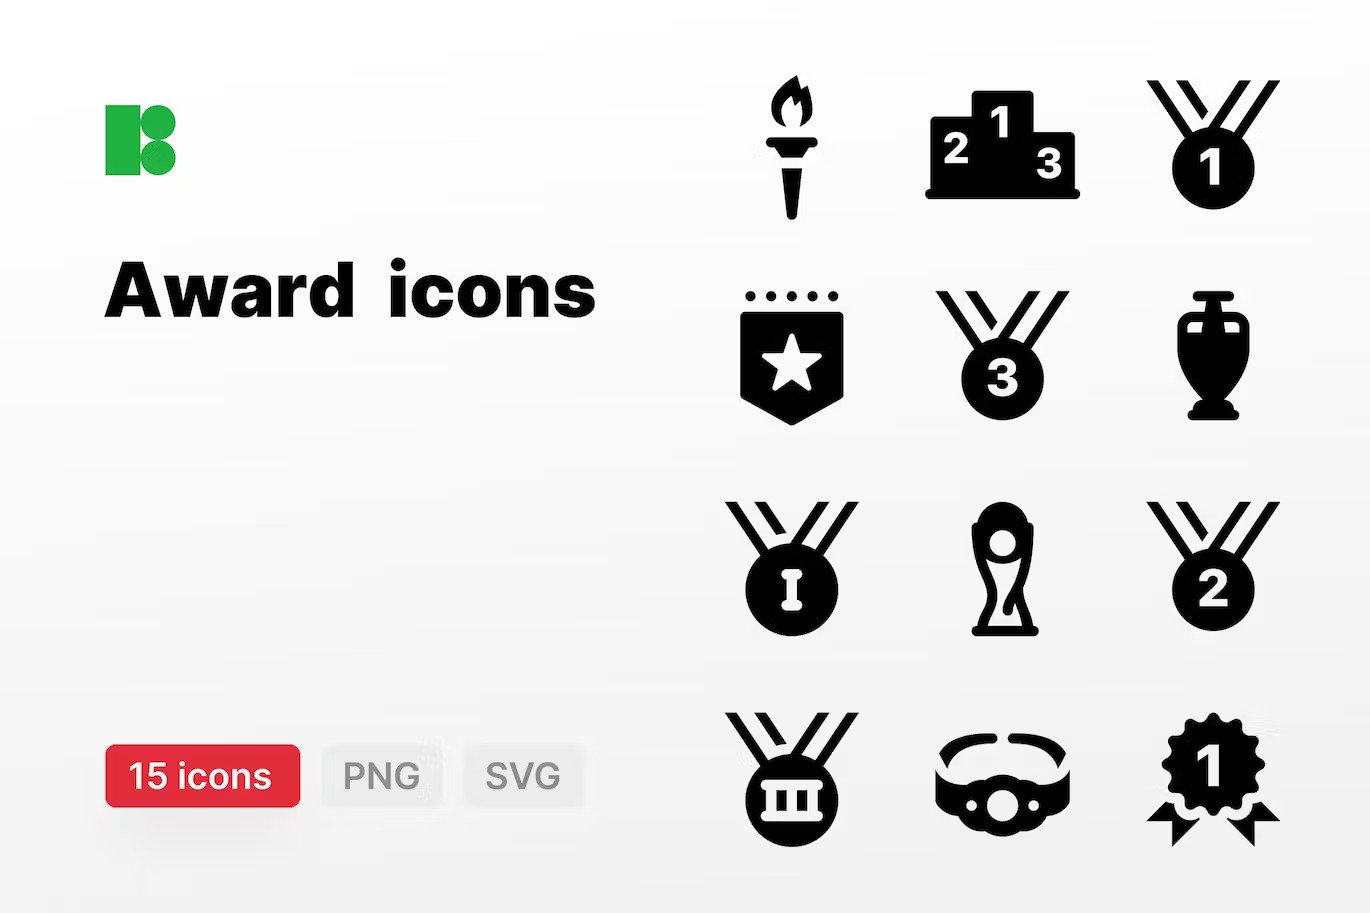 A black and white award icons